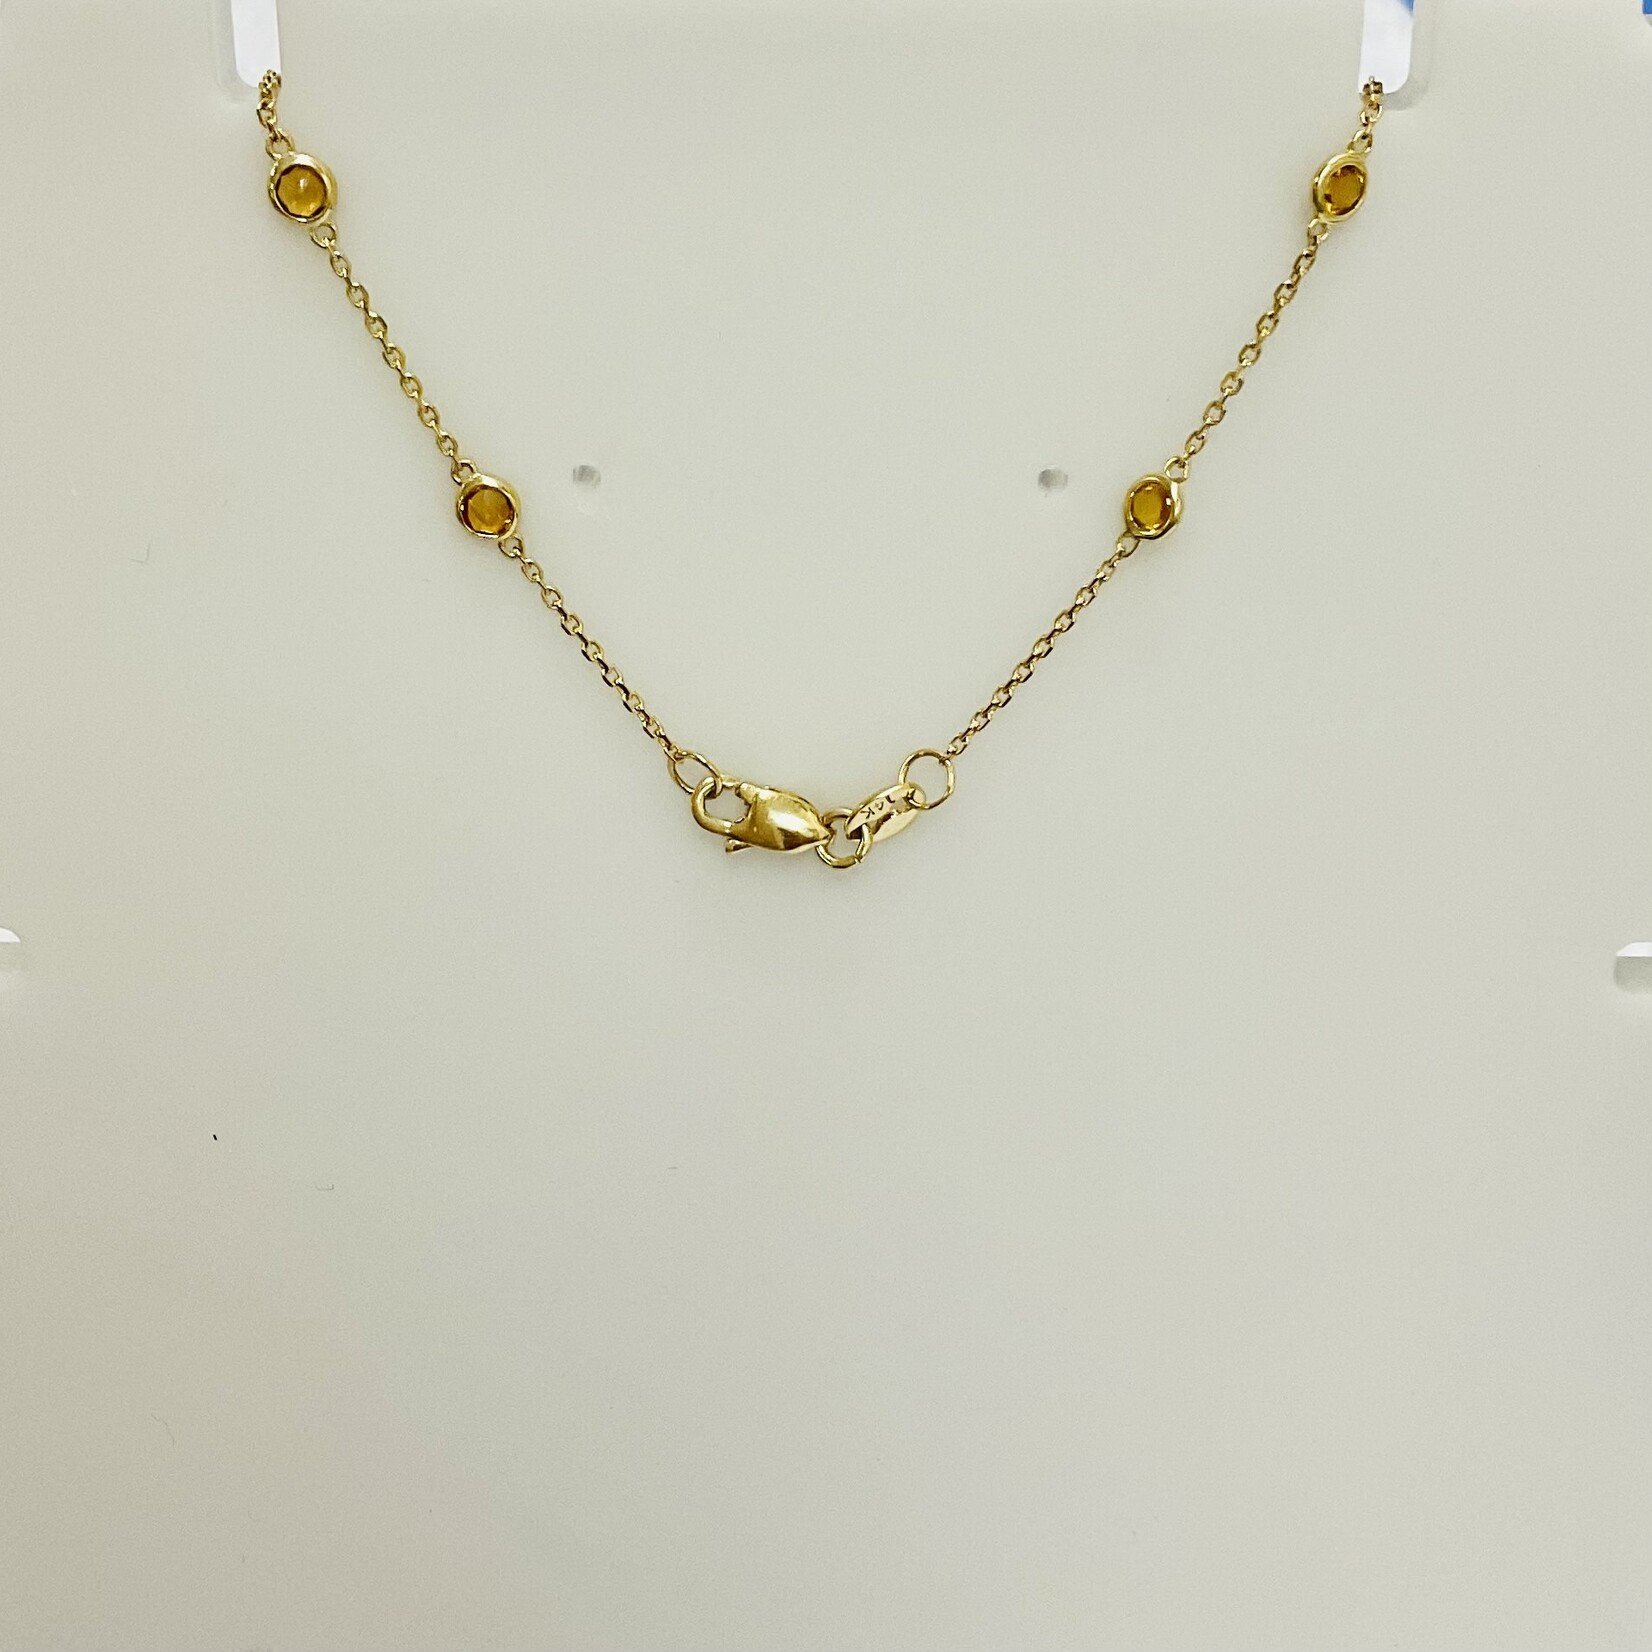 14K Yellow gold citrine necklace